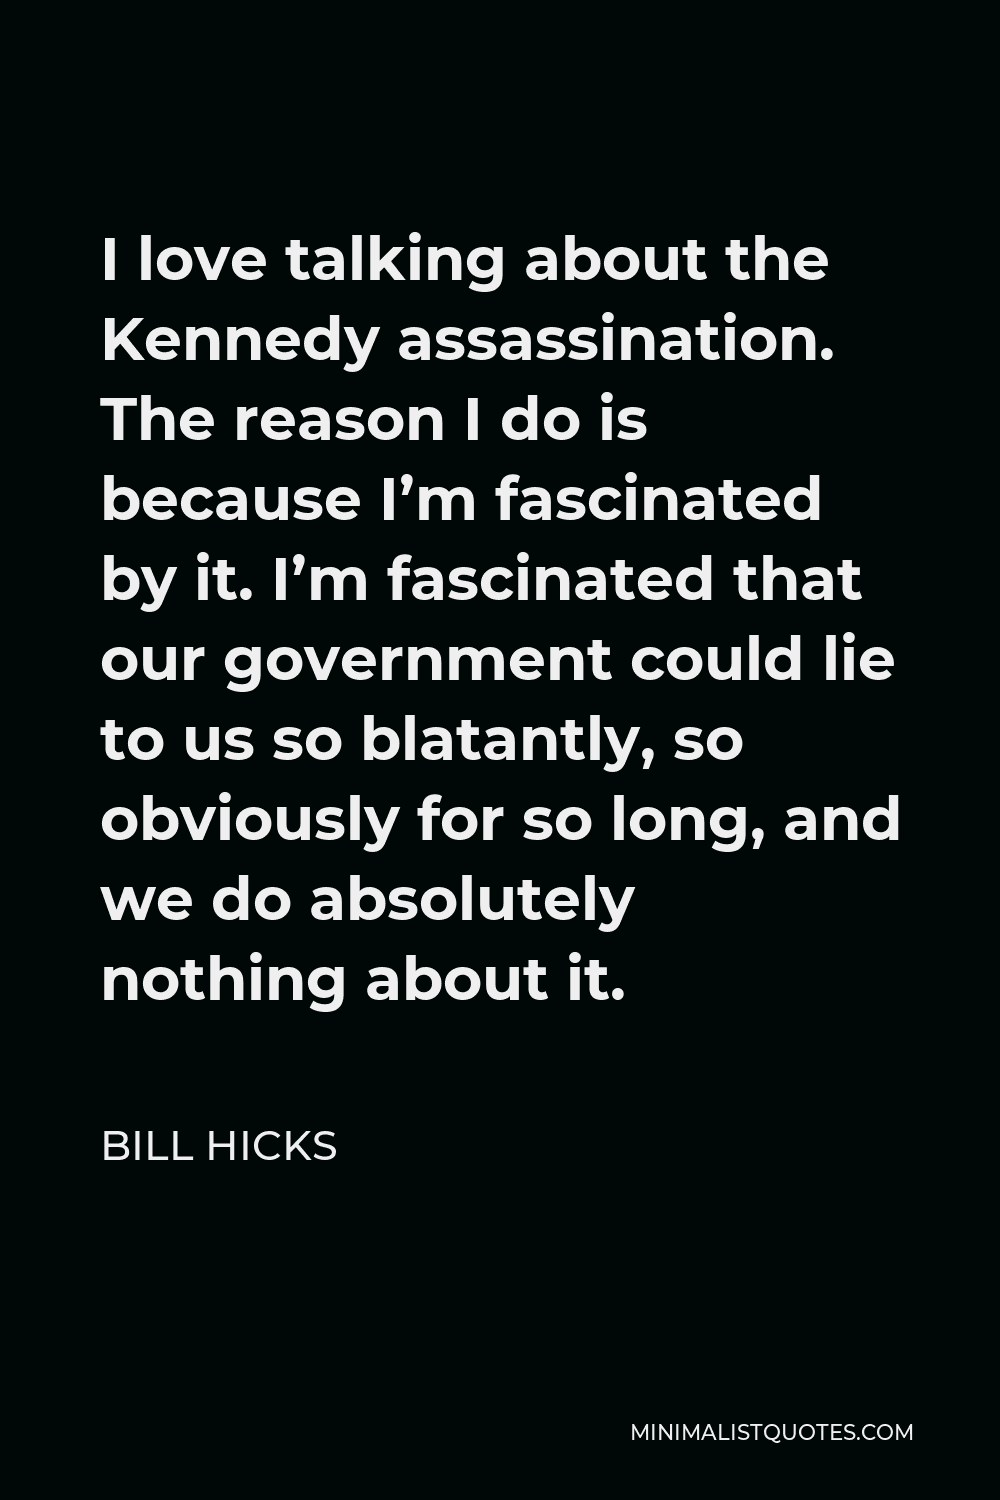 Bill Hicks Quote - I love talking about the Kennedy assassination. The reason I do is because I’m fascinated by it. I’m fascinated that our government could lie to us so blatantly, so obviously for so long, and we do absolutely nothing about it.